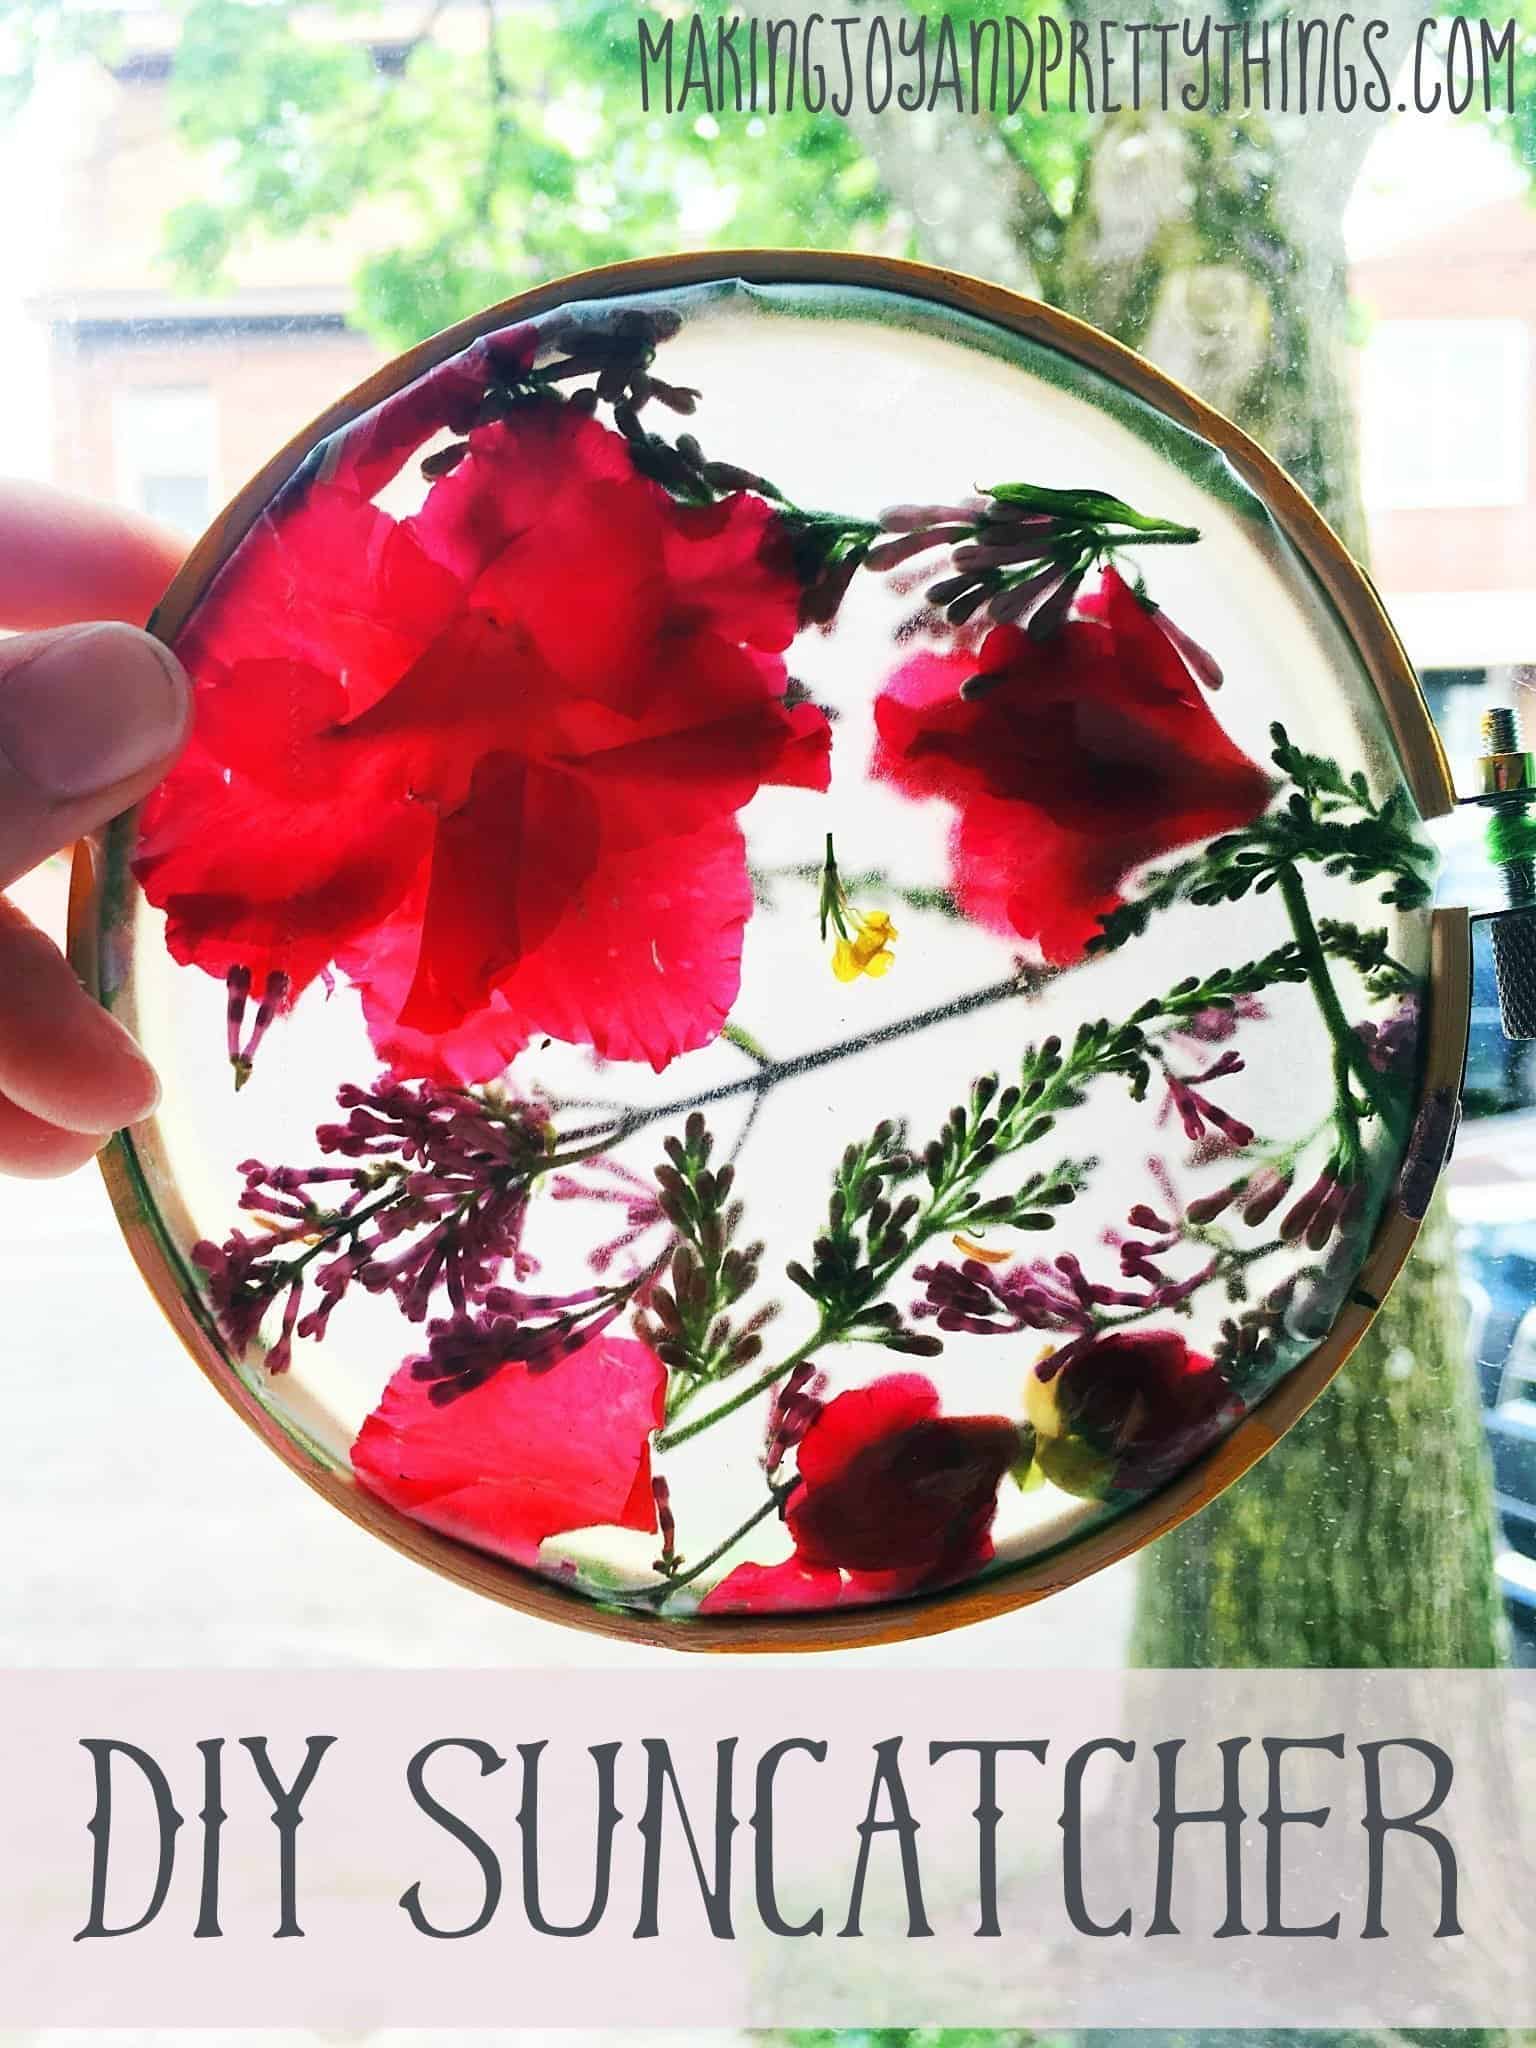 Colorful Suncatcher Crafts for Kids to Make - Artsy Momma